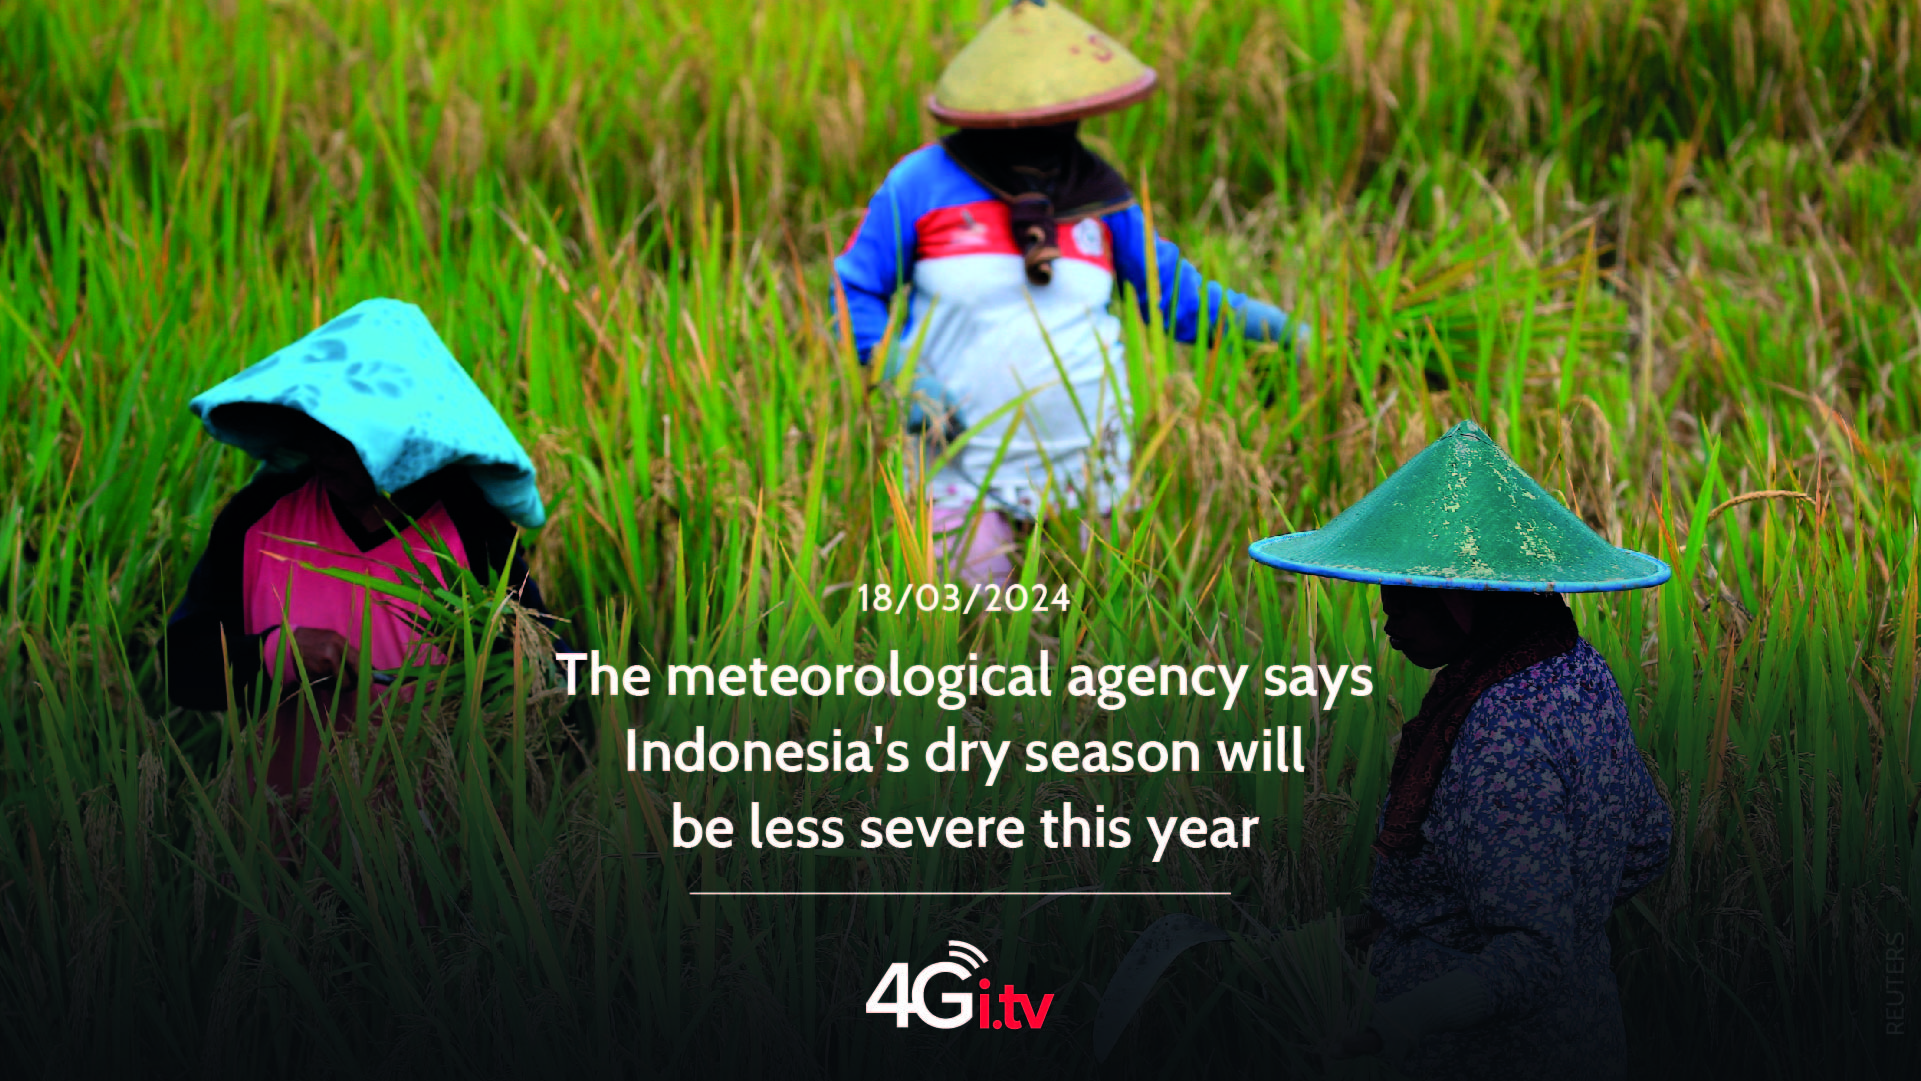 Lesen Sie mehr über den Artikel The meteorological agency says Indonesia’s dry season will be less severe this year 